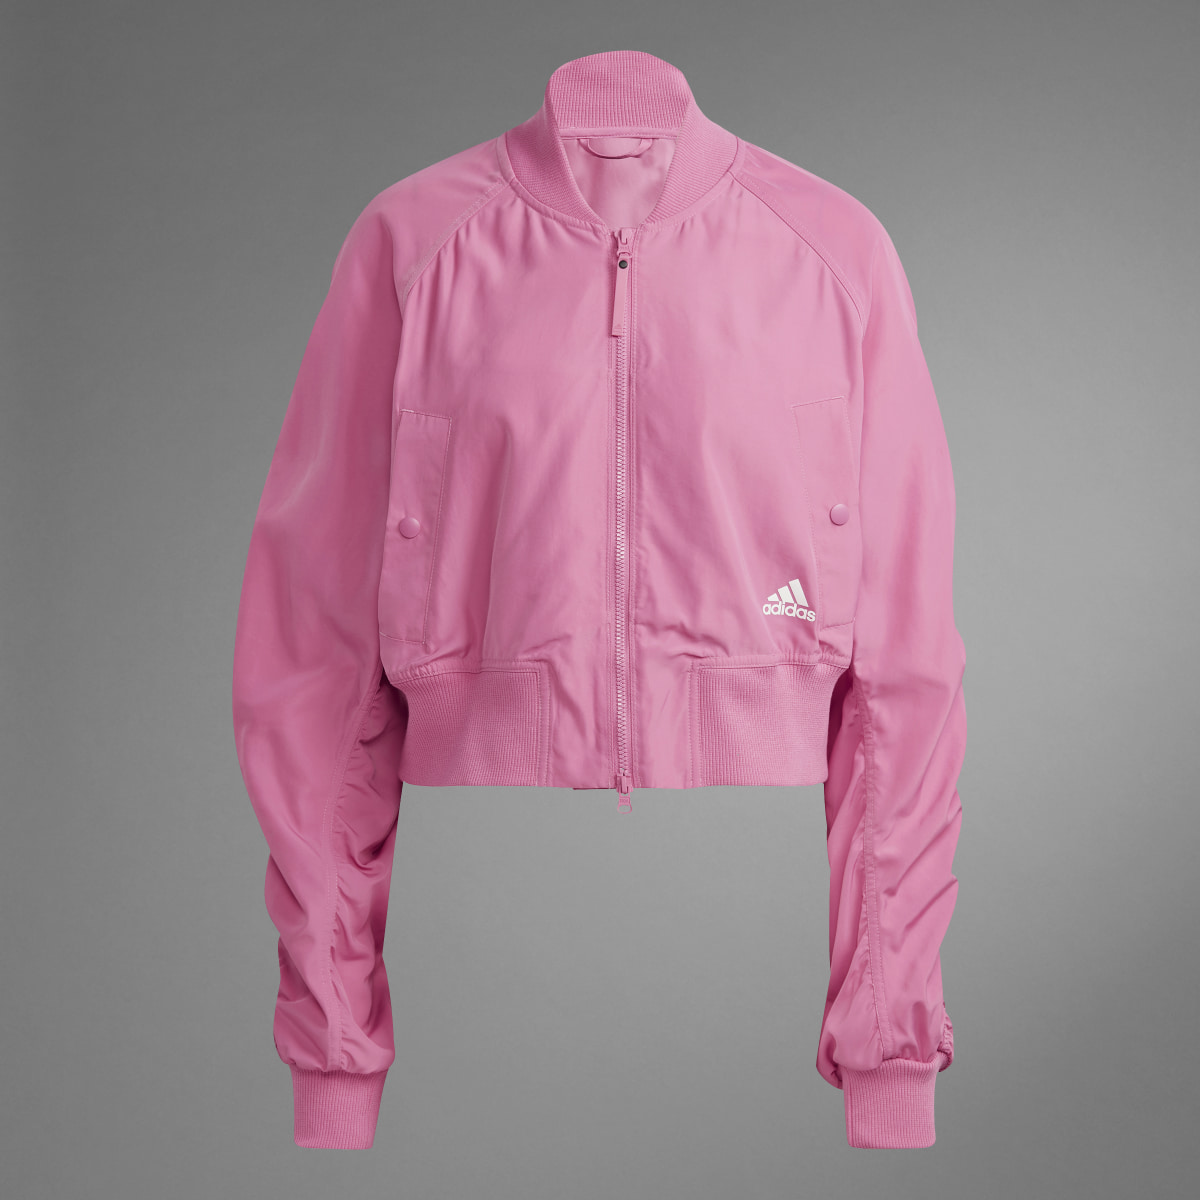 Adidas Collective Power Bomber Jacket. 10